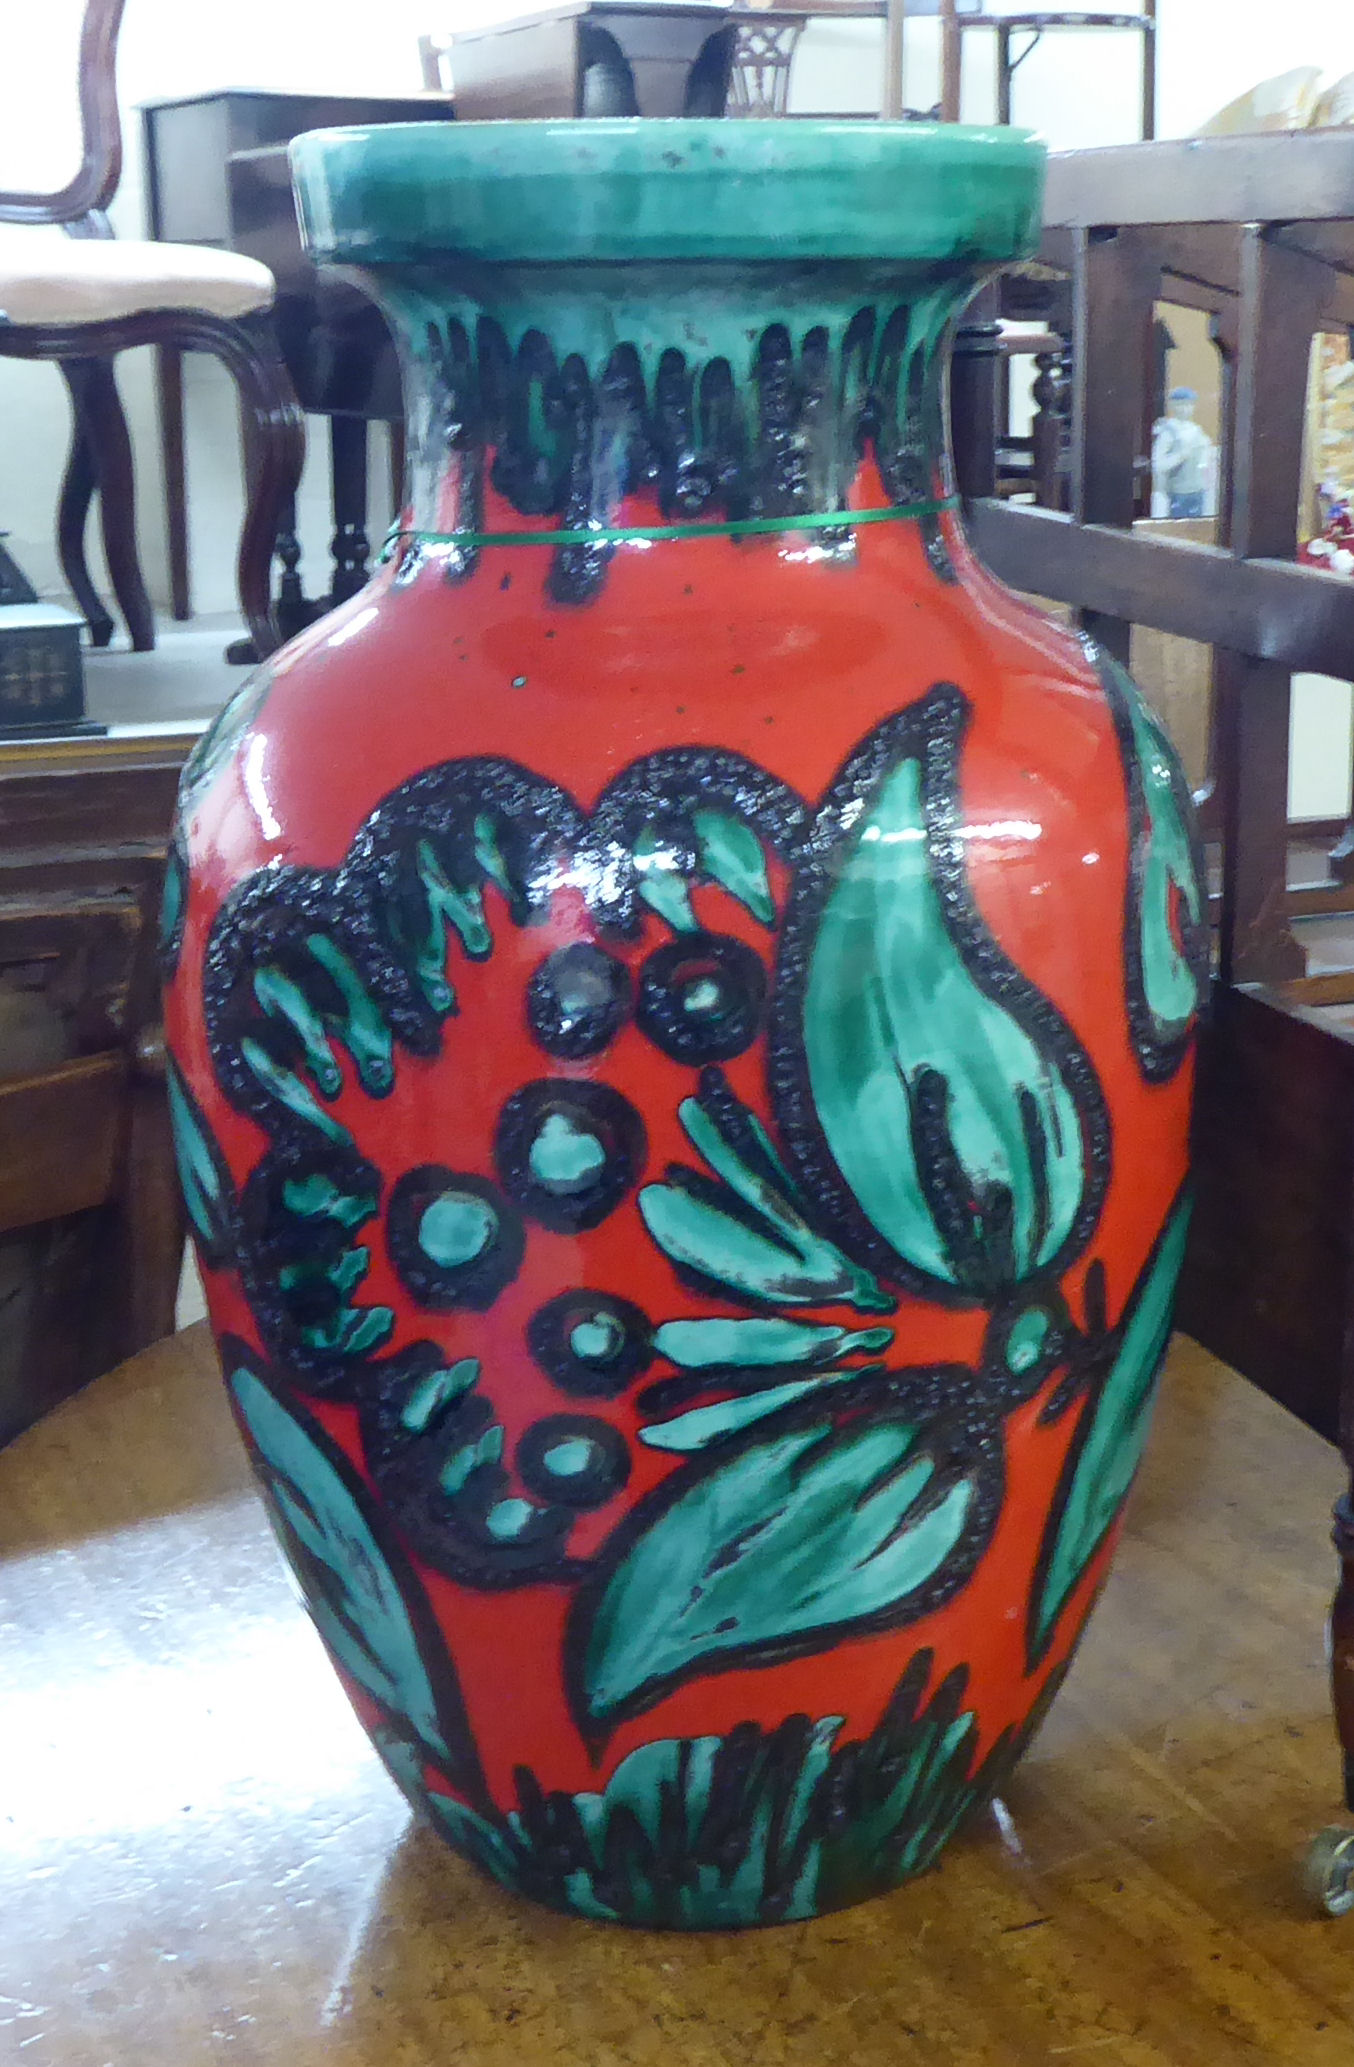 A West German pottery vase, decorated in abstract designs, on a red ground  19"h - Image 2 of 4